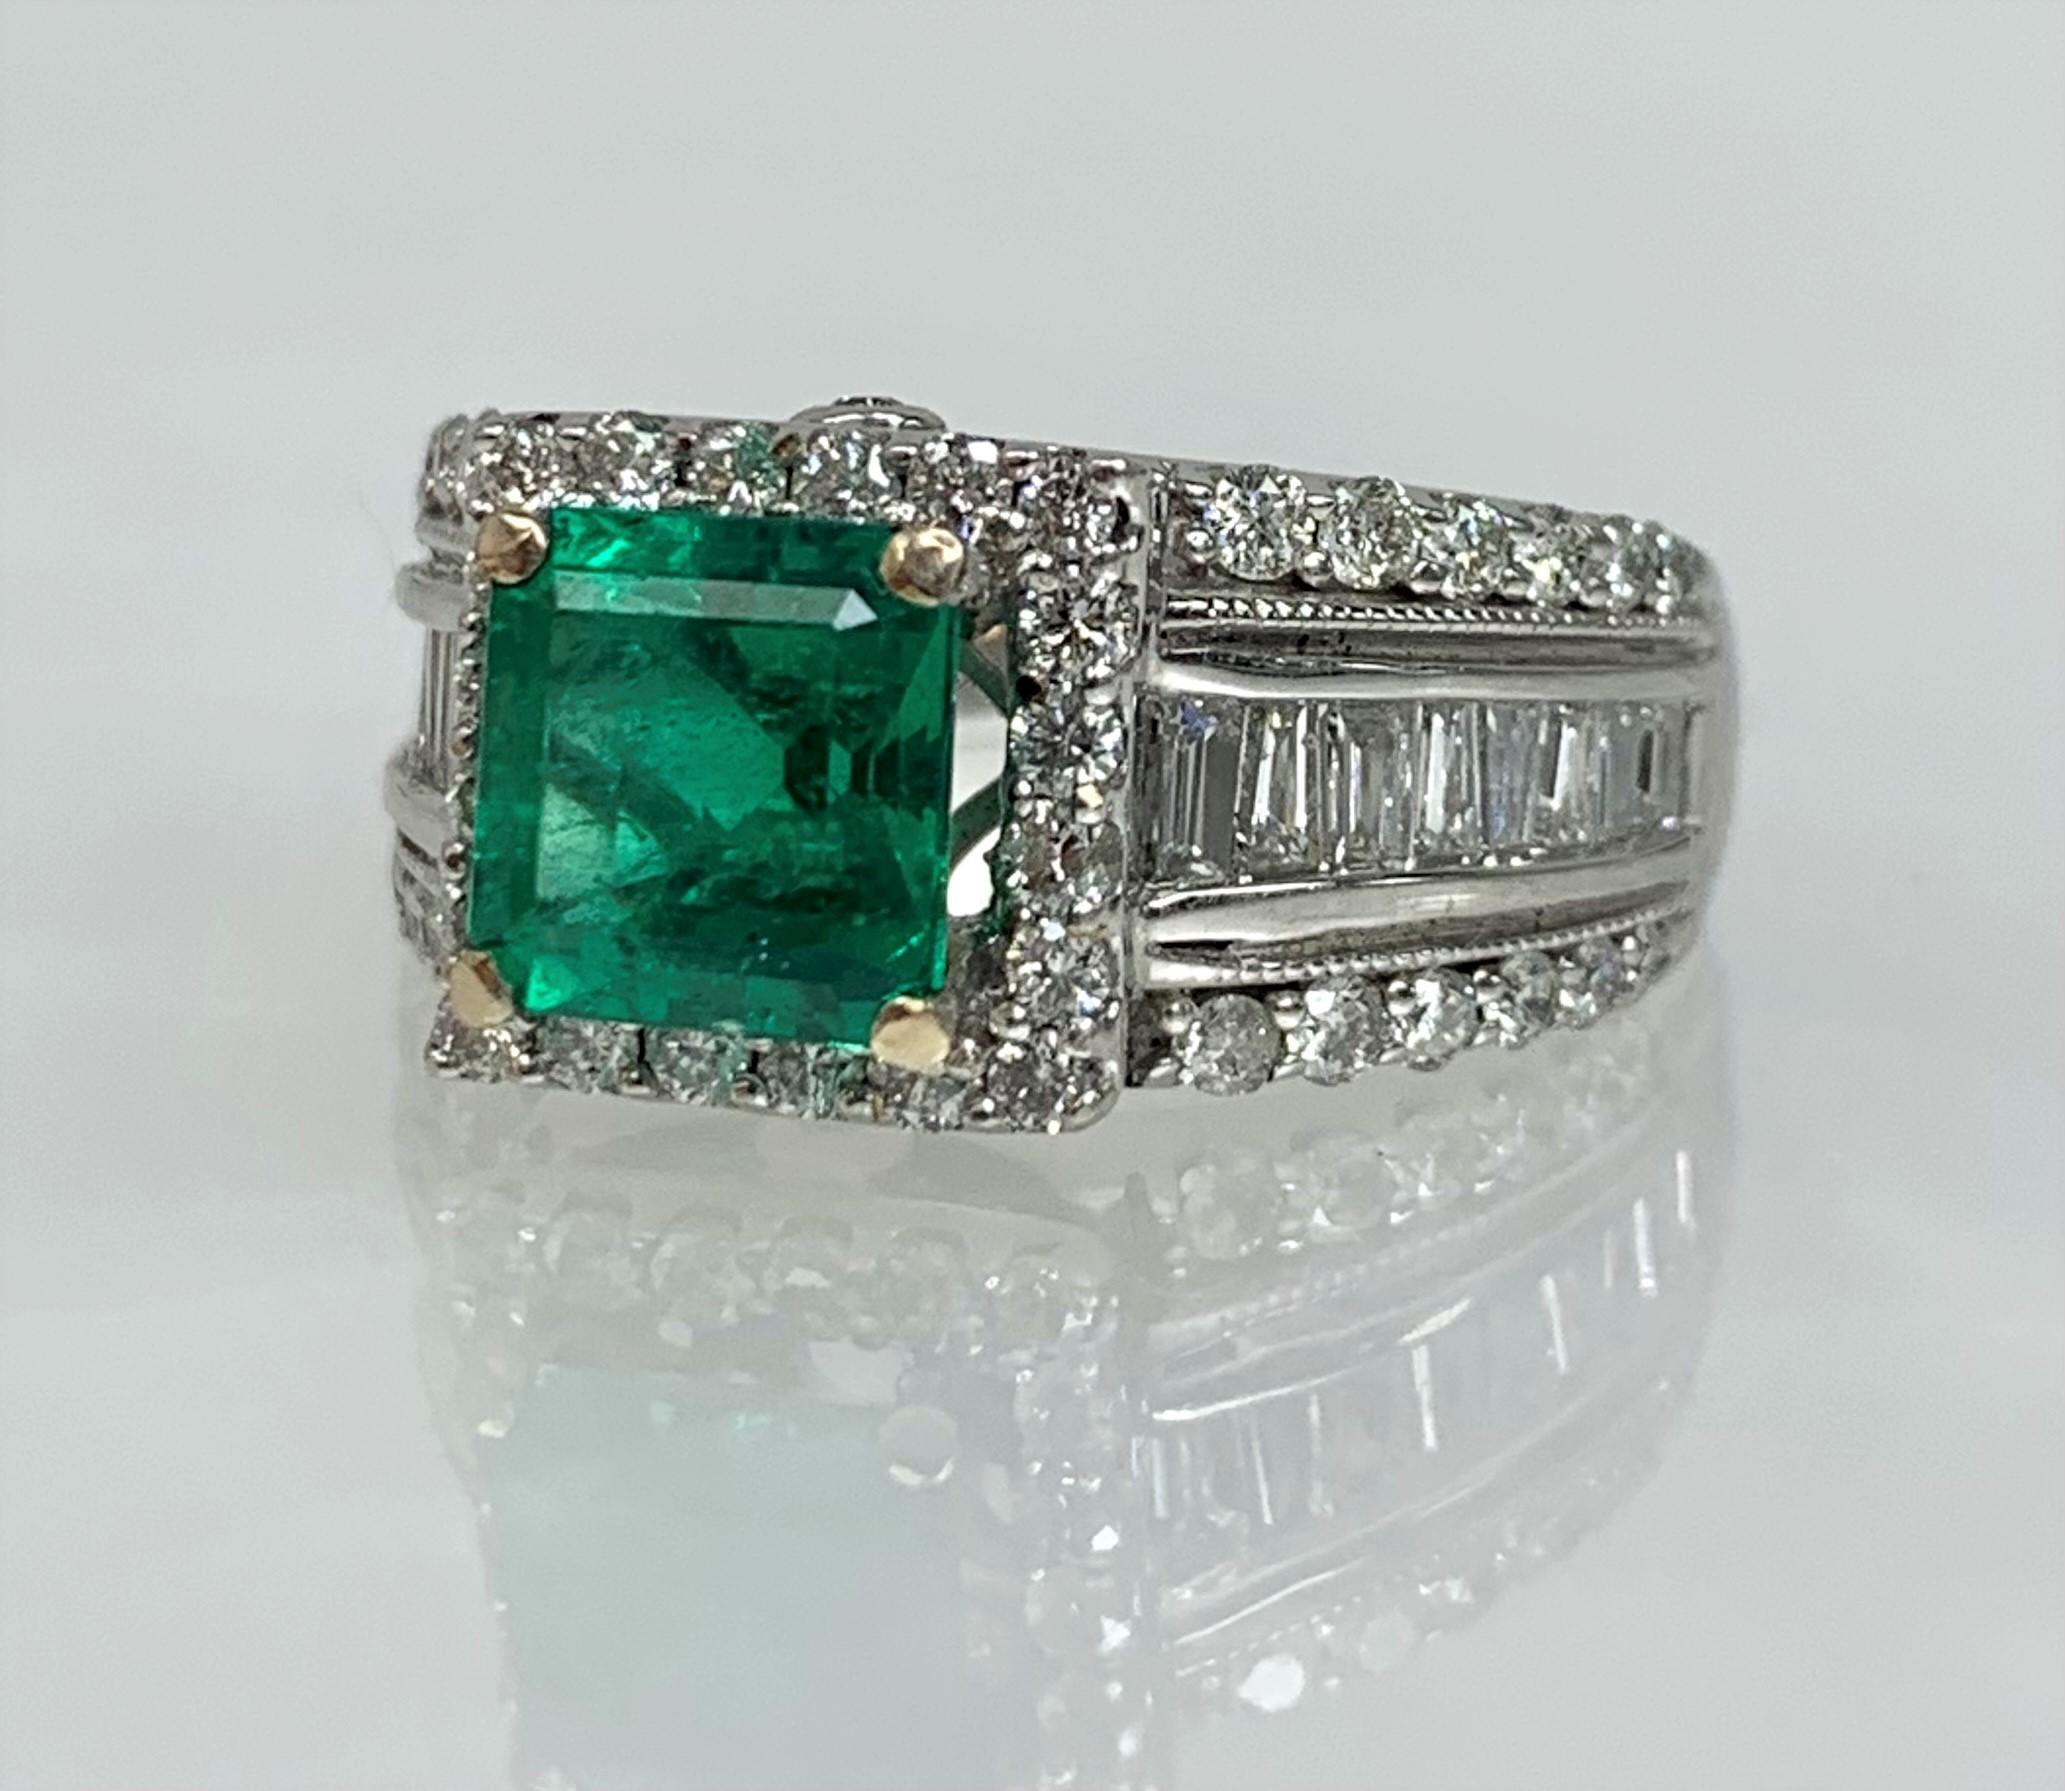 A luxurious and vibrant Colombian emerald ring featuring a square/emerald cut center stone weighing 1.96 carats set amidst alternating rows of of baguette and round shaped diamonds weighing 2.53 carats of diamonds set in solid 14k white